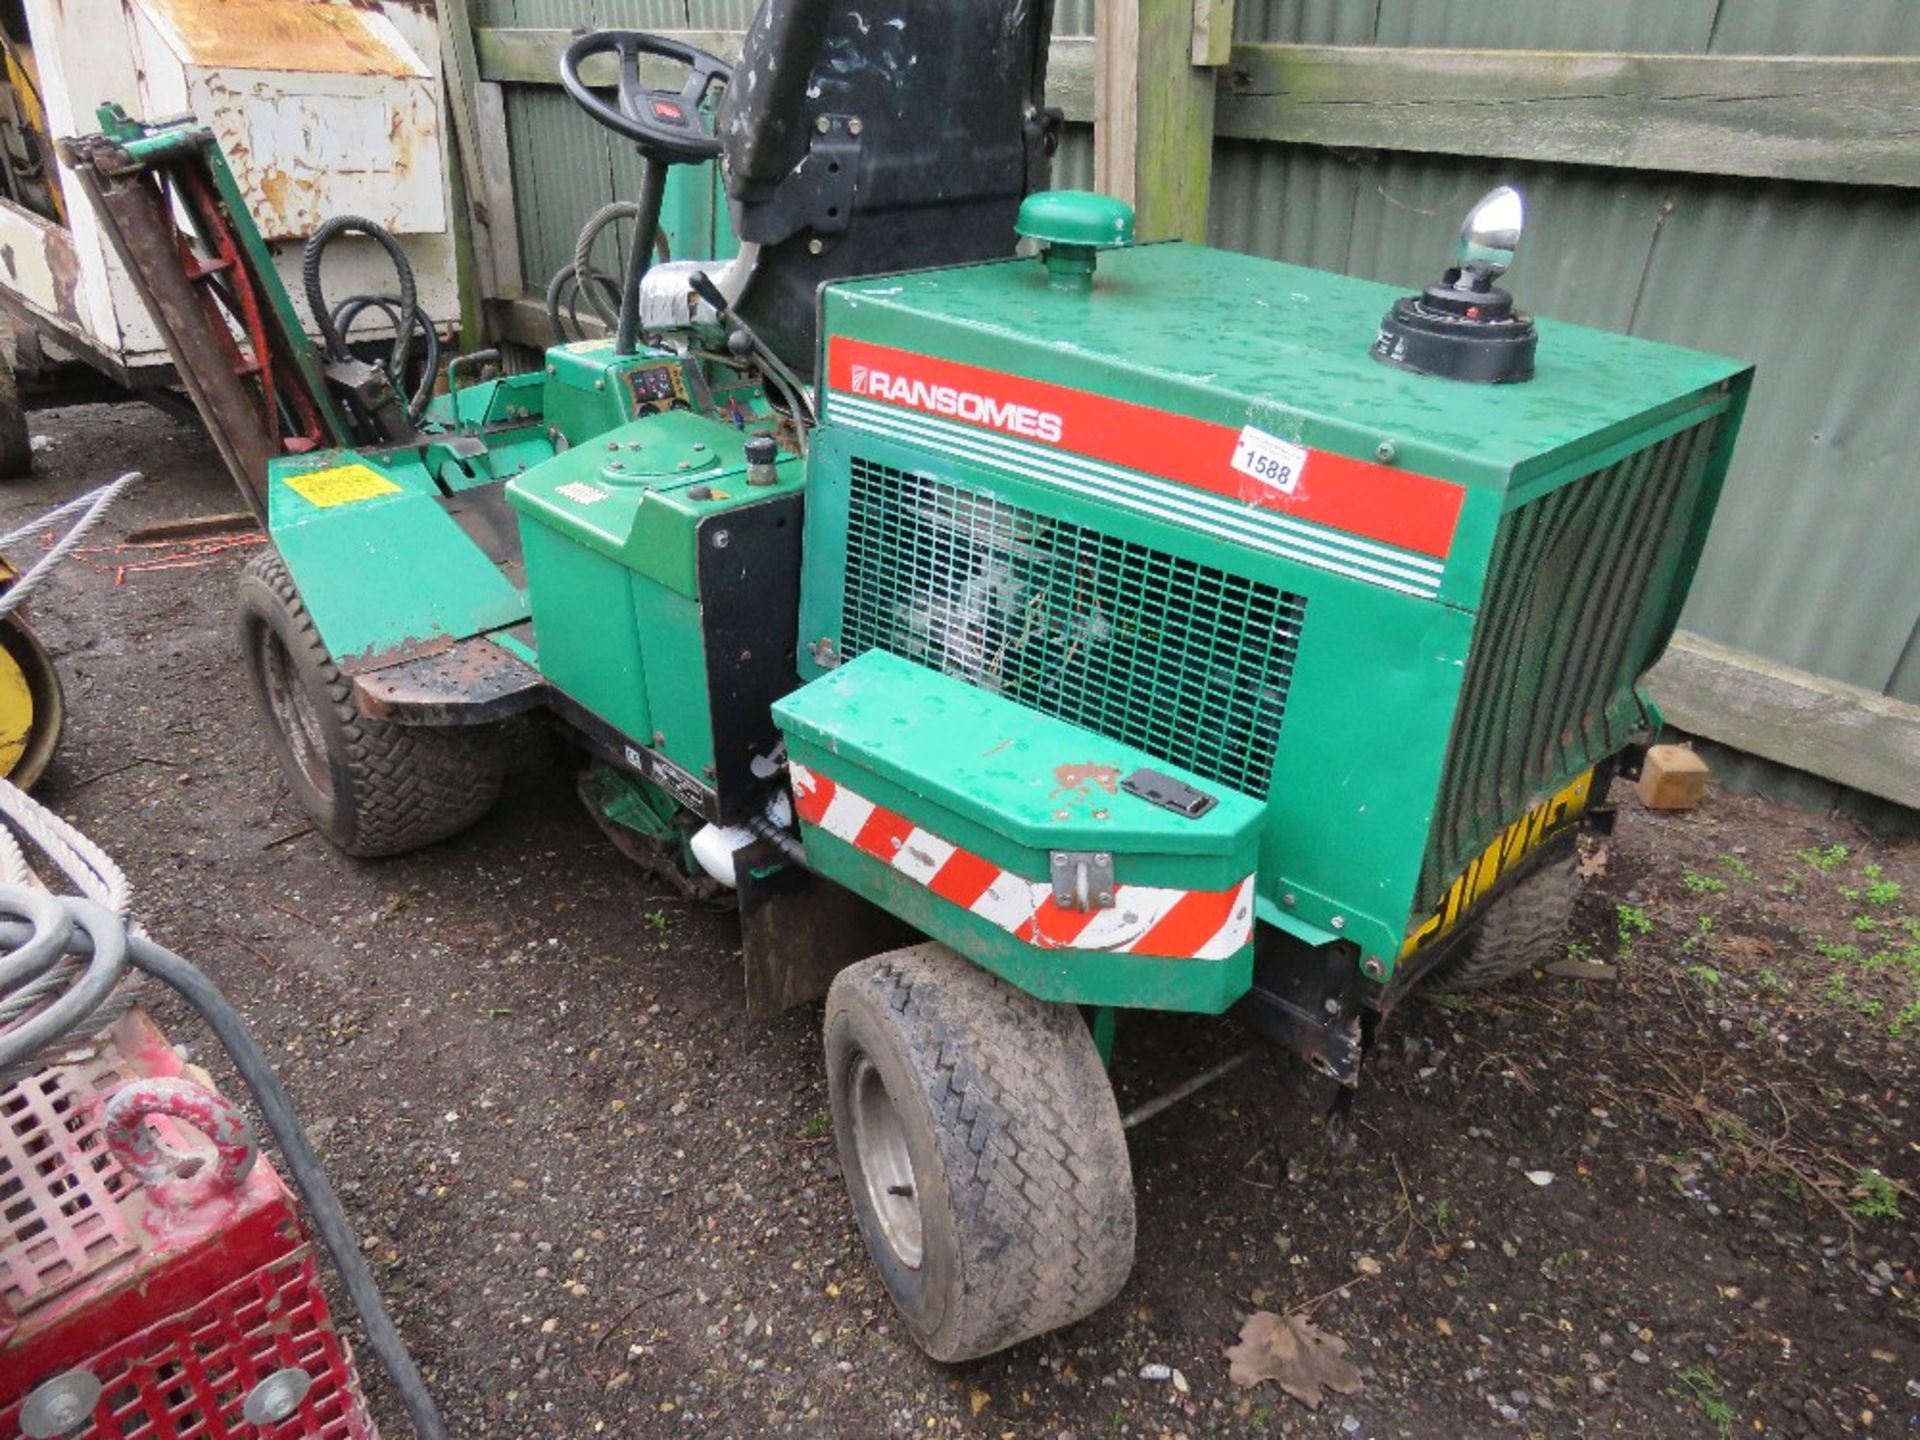 RANSOMES 213 TRIPLE RIDE ON CYLINDER MOWER WITH KUBOTA ENGINE. WHEN TESTED WAS SEEN TO RUN, DRIVE, M - Image 5 of 10